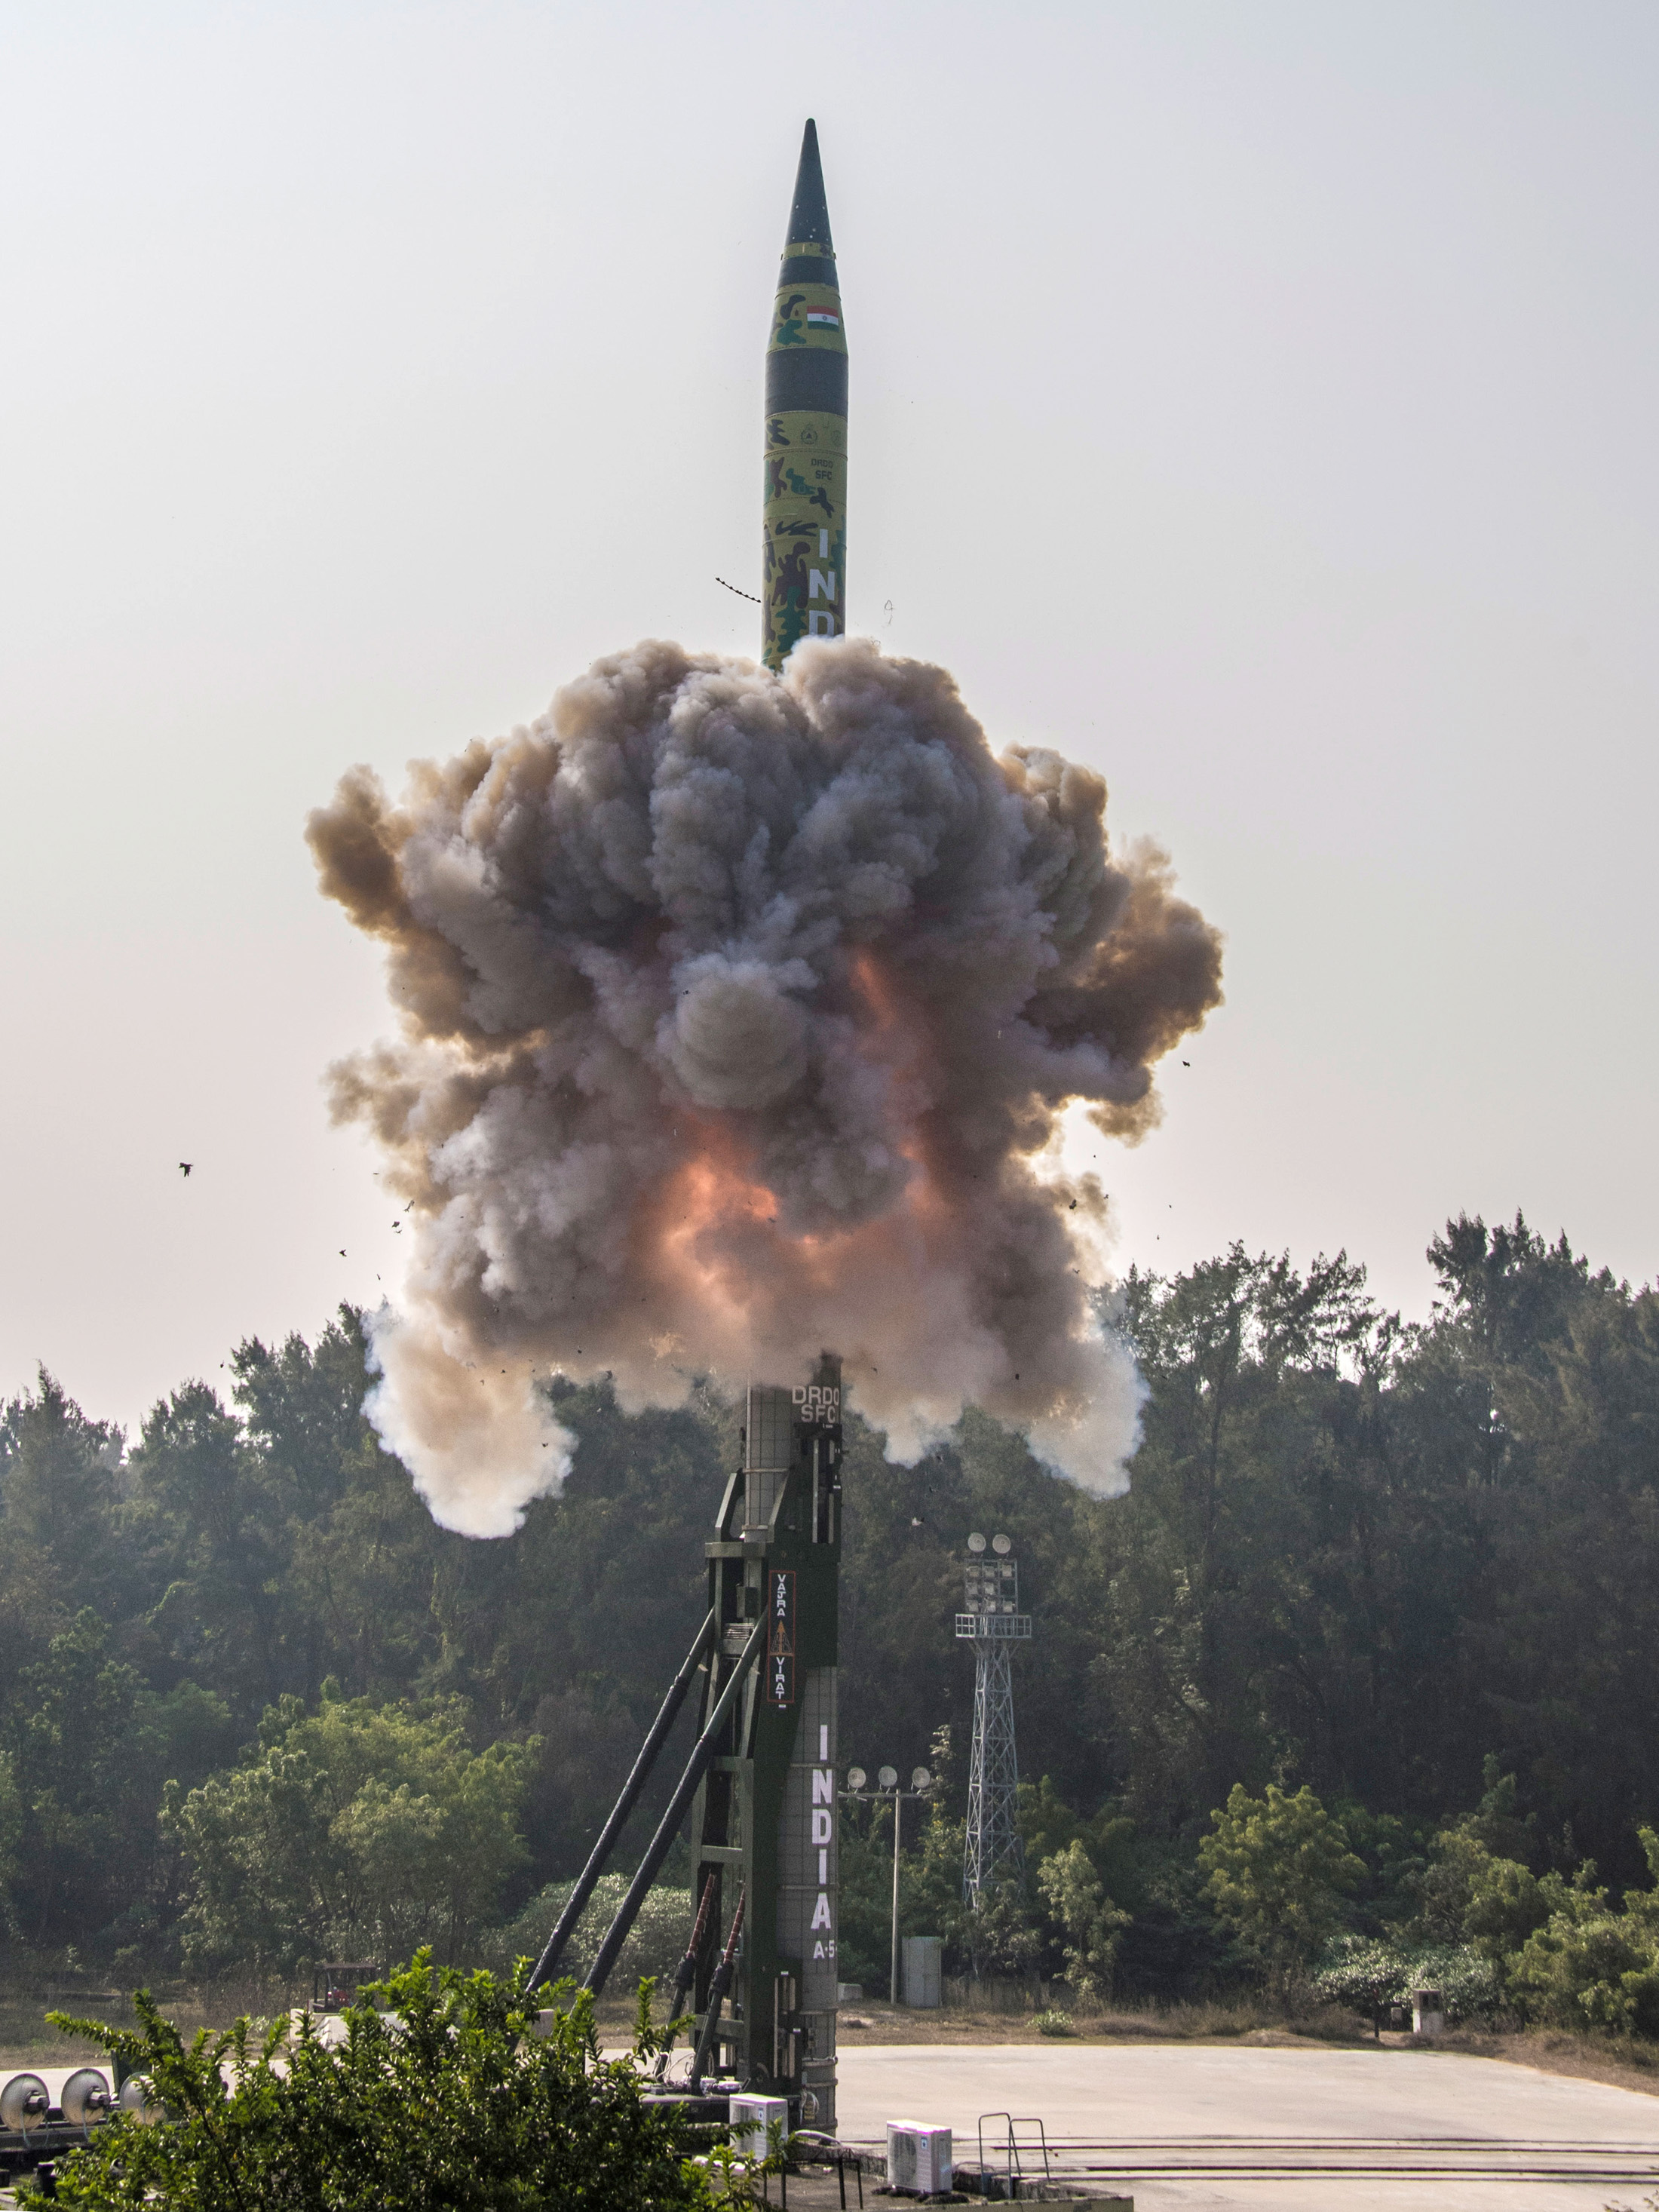 Agni_V_Ballistic_missile_successfully_launched_on_December_10,_2018.jpg